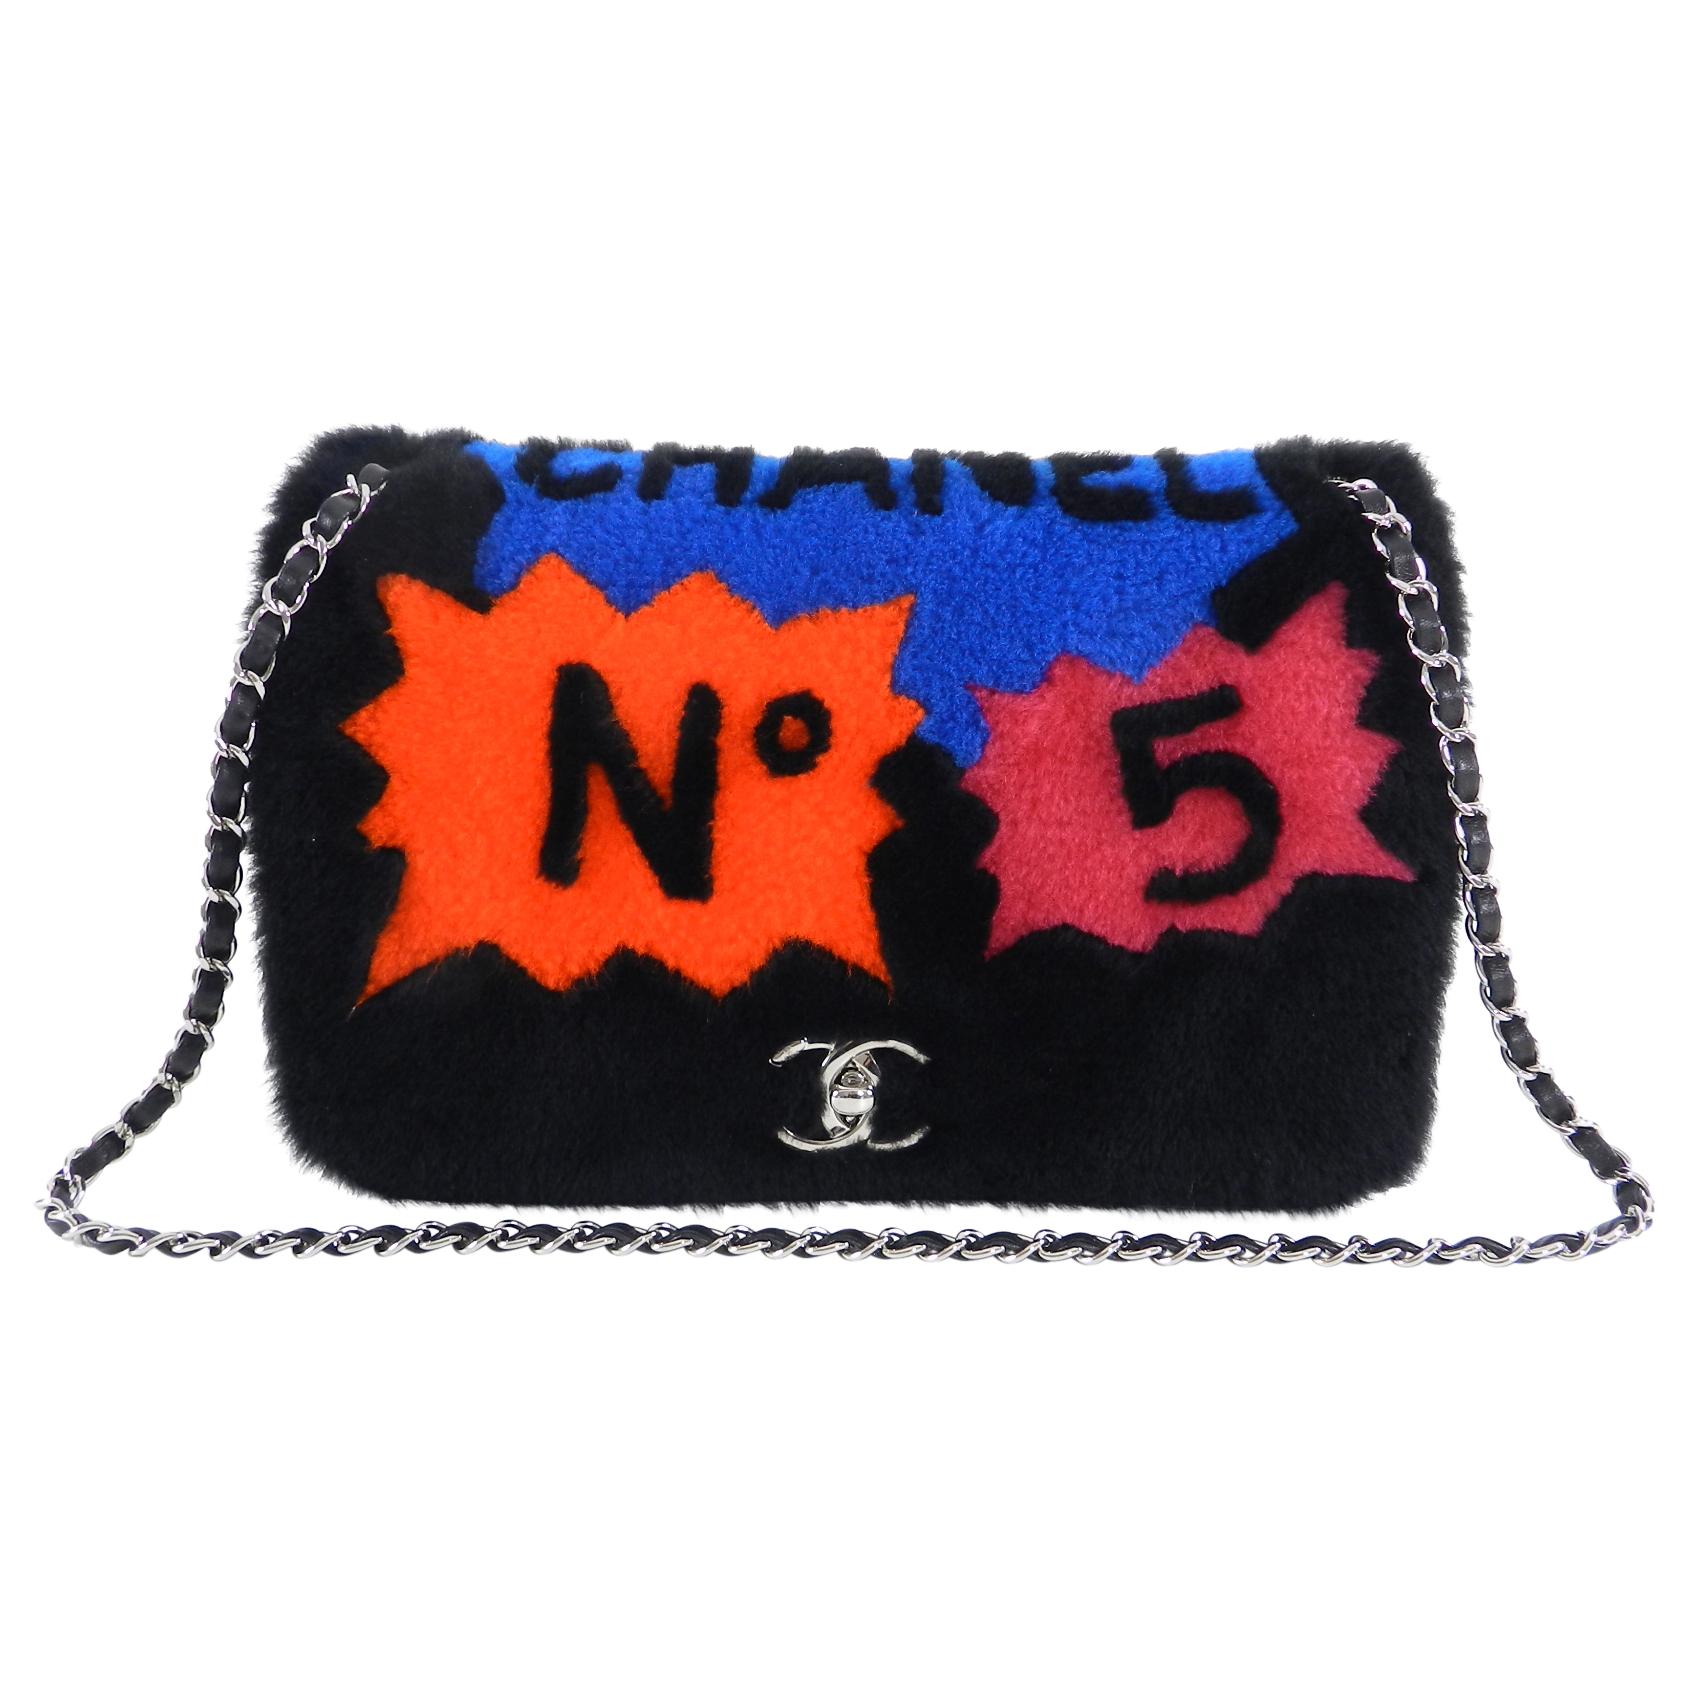 Chanel 14A Patchwork No. 5 Caption Comic Shearling jumbo flap bag in black. Limited edition bag with original retail price of $7450 CAD.  Comic text design in hot pink, orange, yellow, and blue.  Soft shearling exterior with quilted lambskin body. 